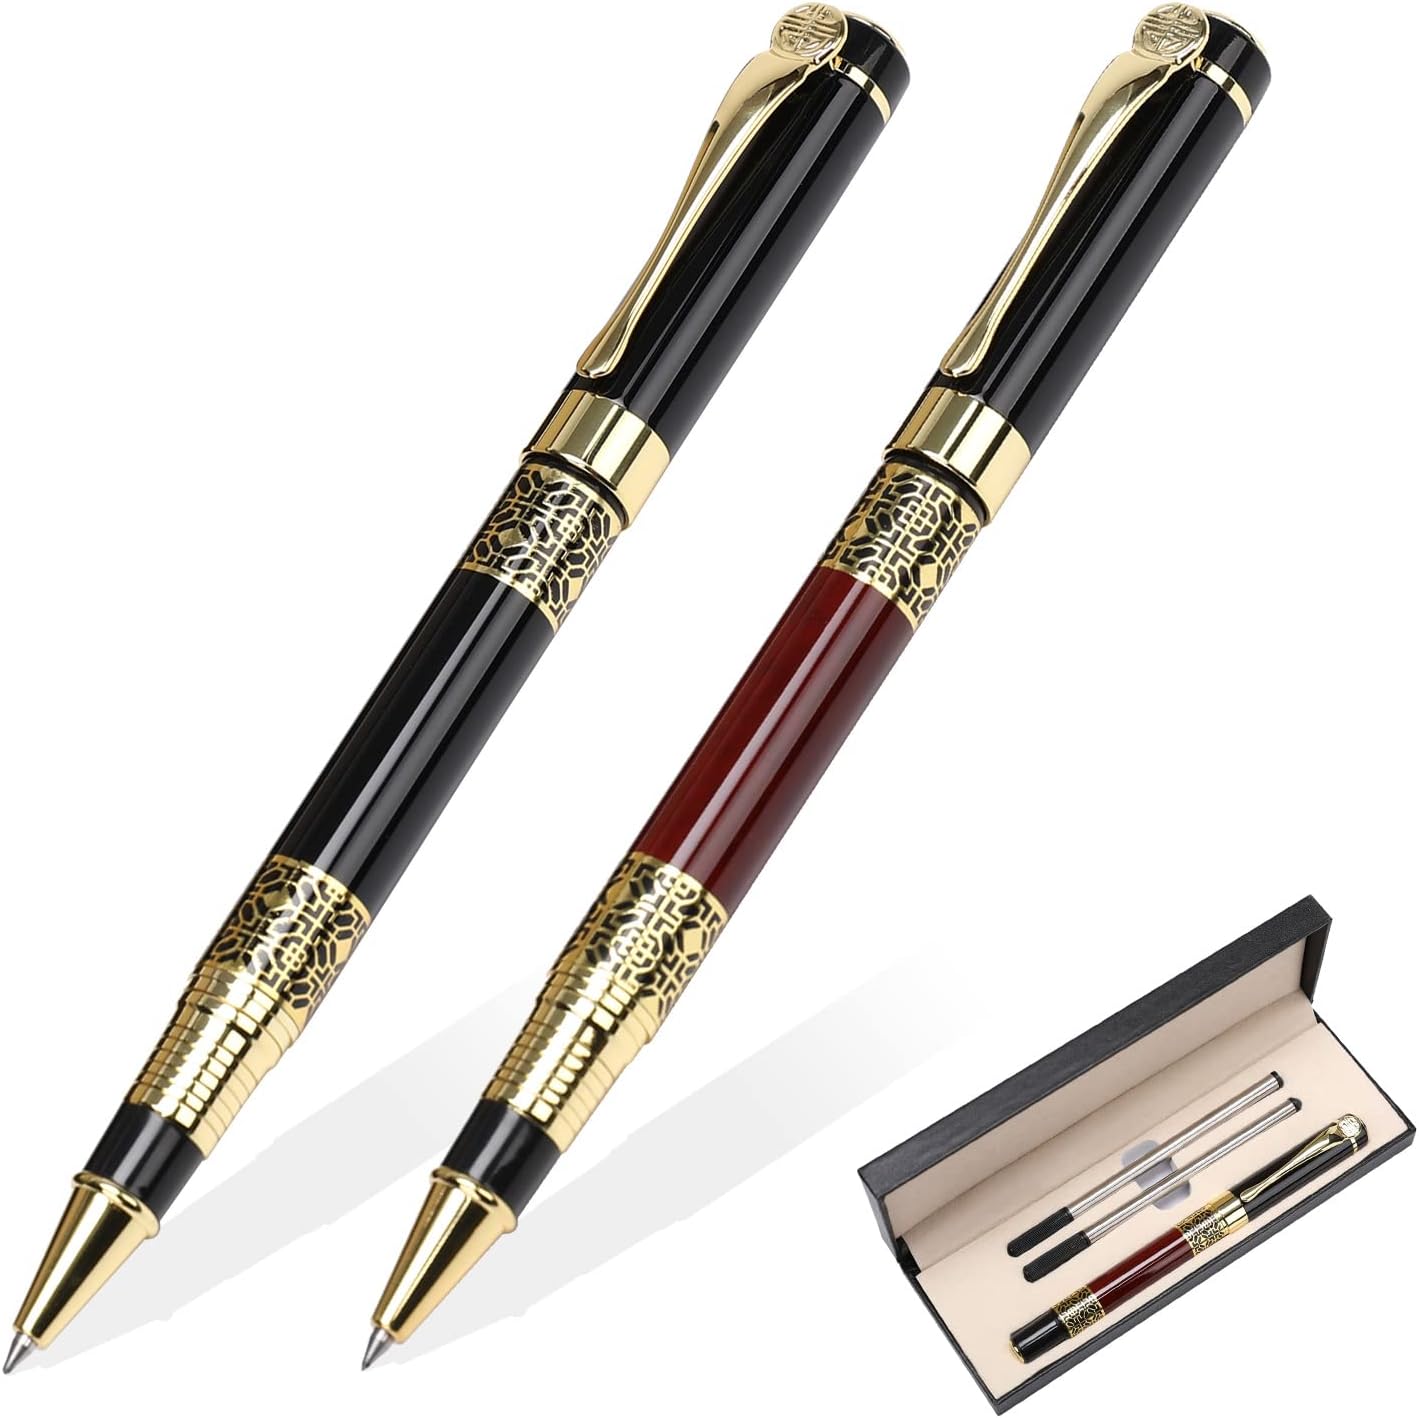 Very nice pen set and it writes very well